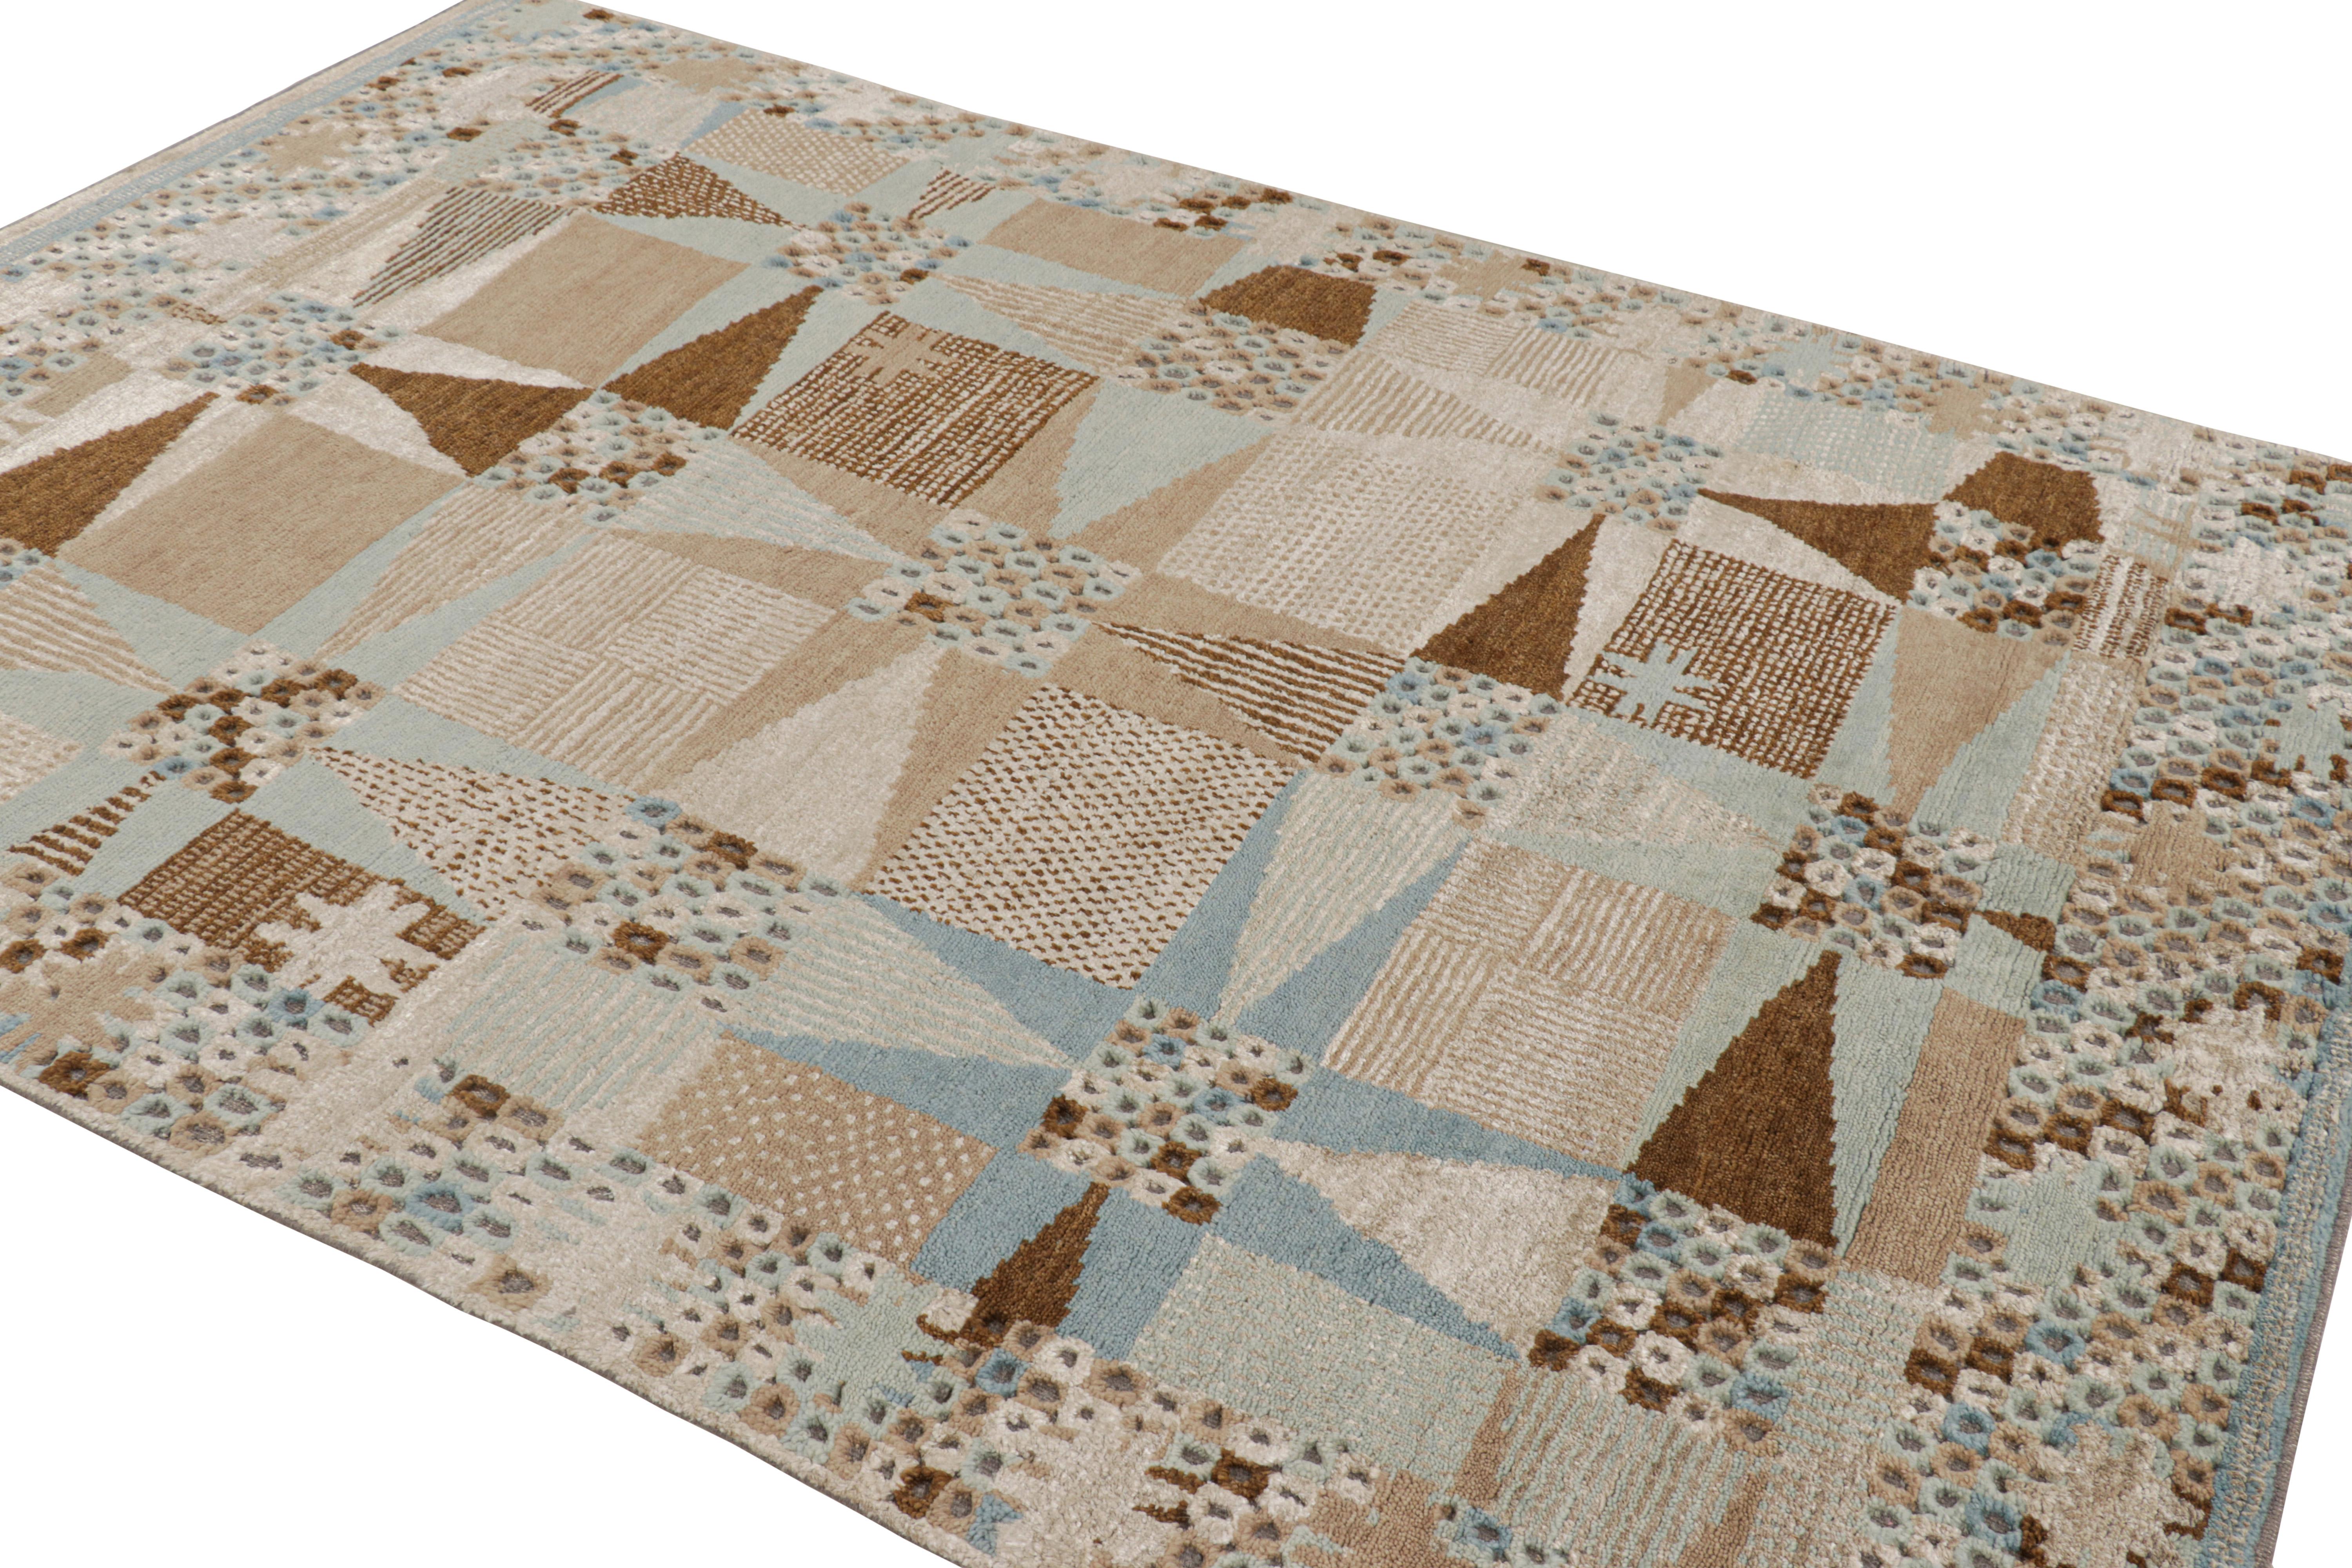 Indian Rug & Kilim’s Scandinavian Style Rug in Beige-Brown and Blue Geometric Patterns For Sale